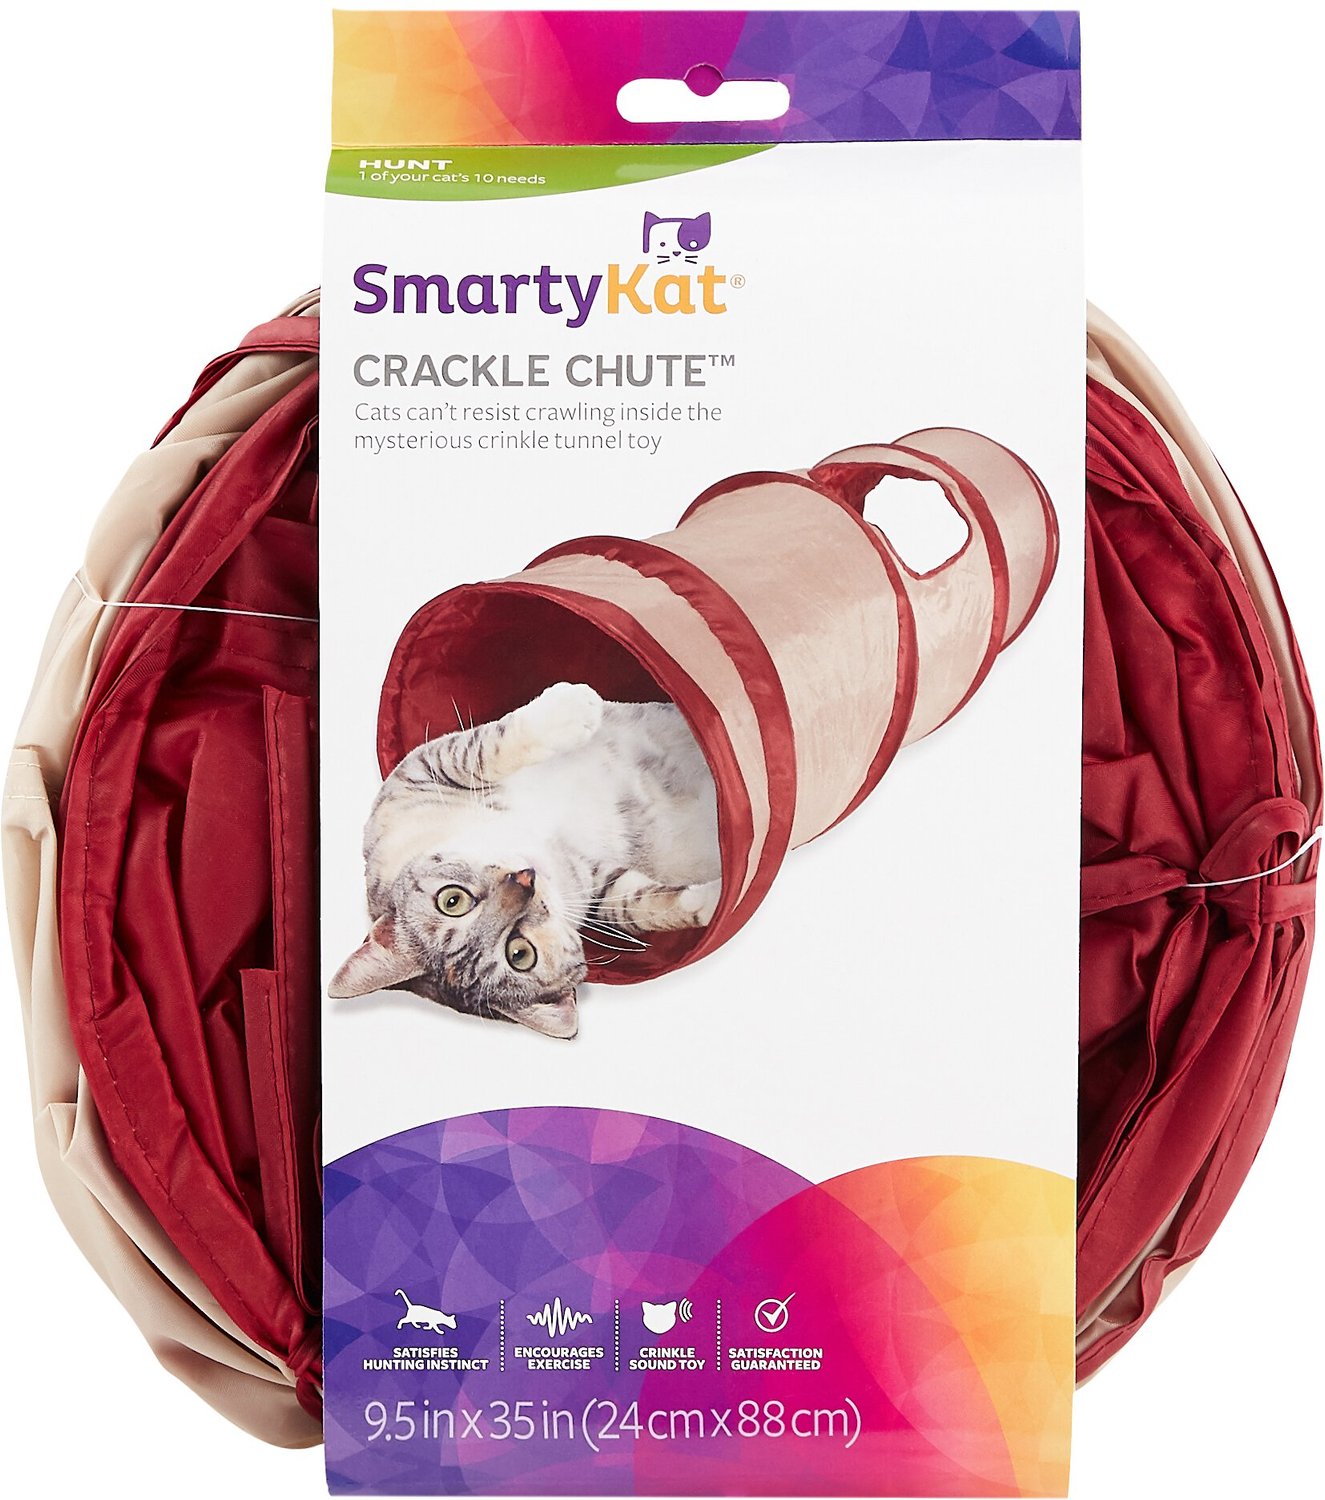 Collapsible Cat Tunnel with Peek Hole Cat Toy Red